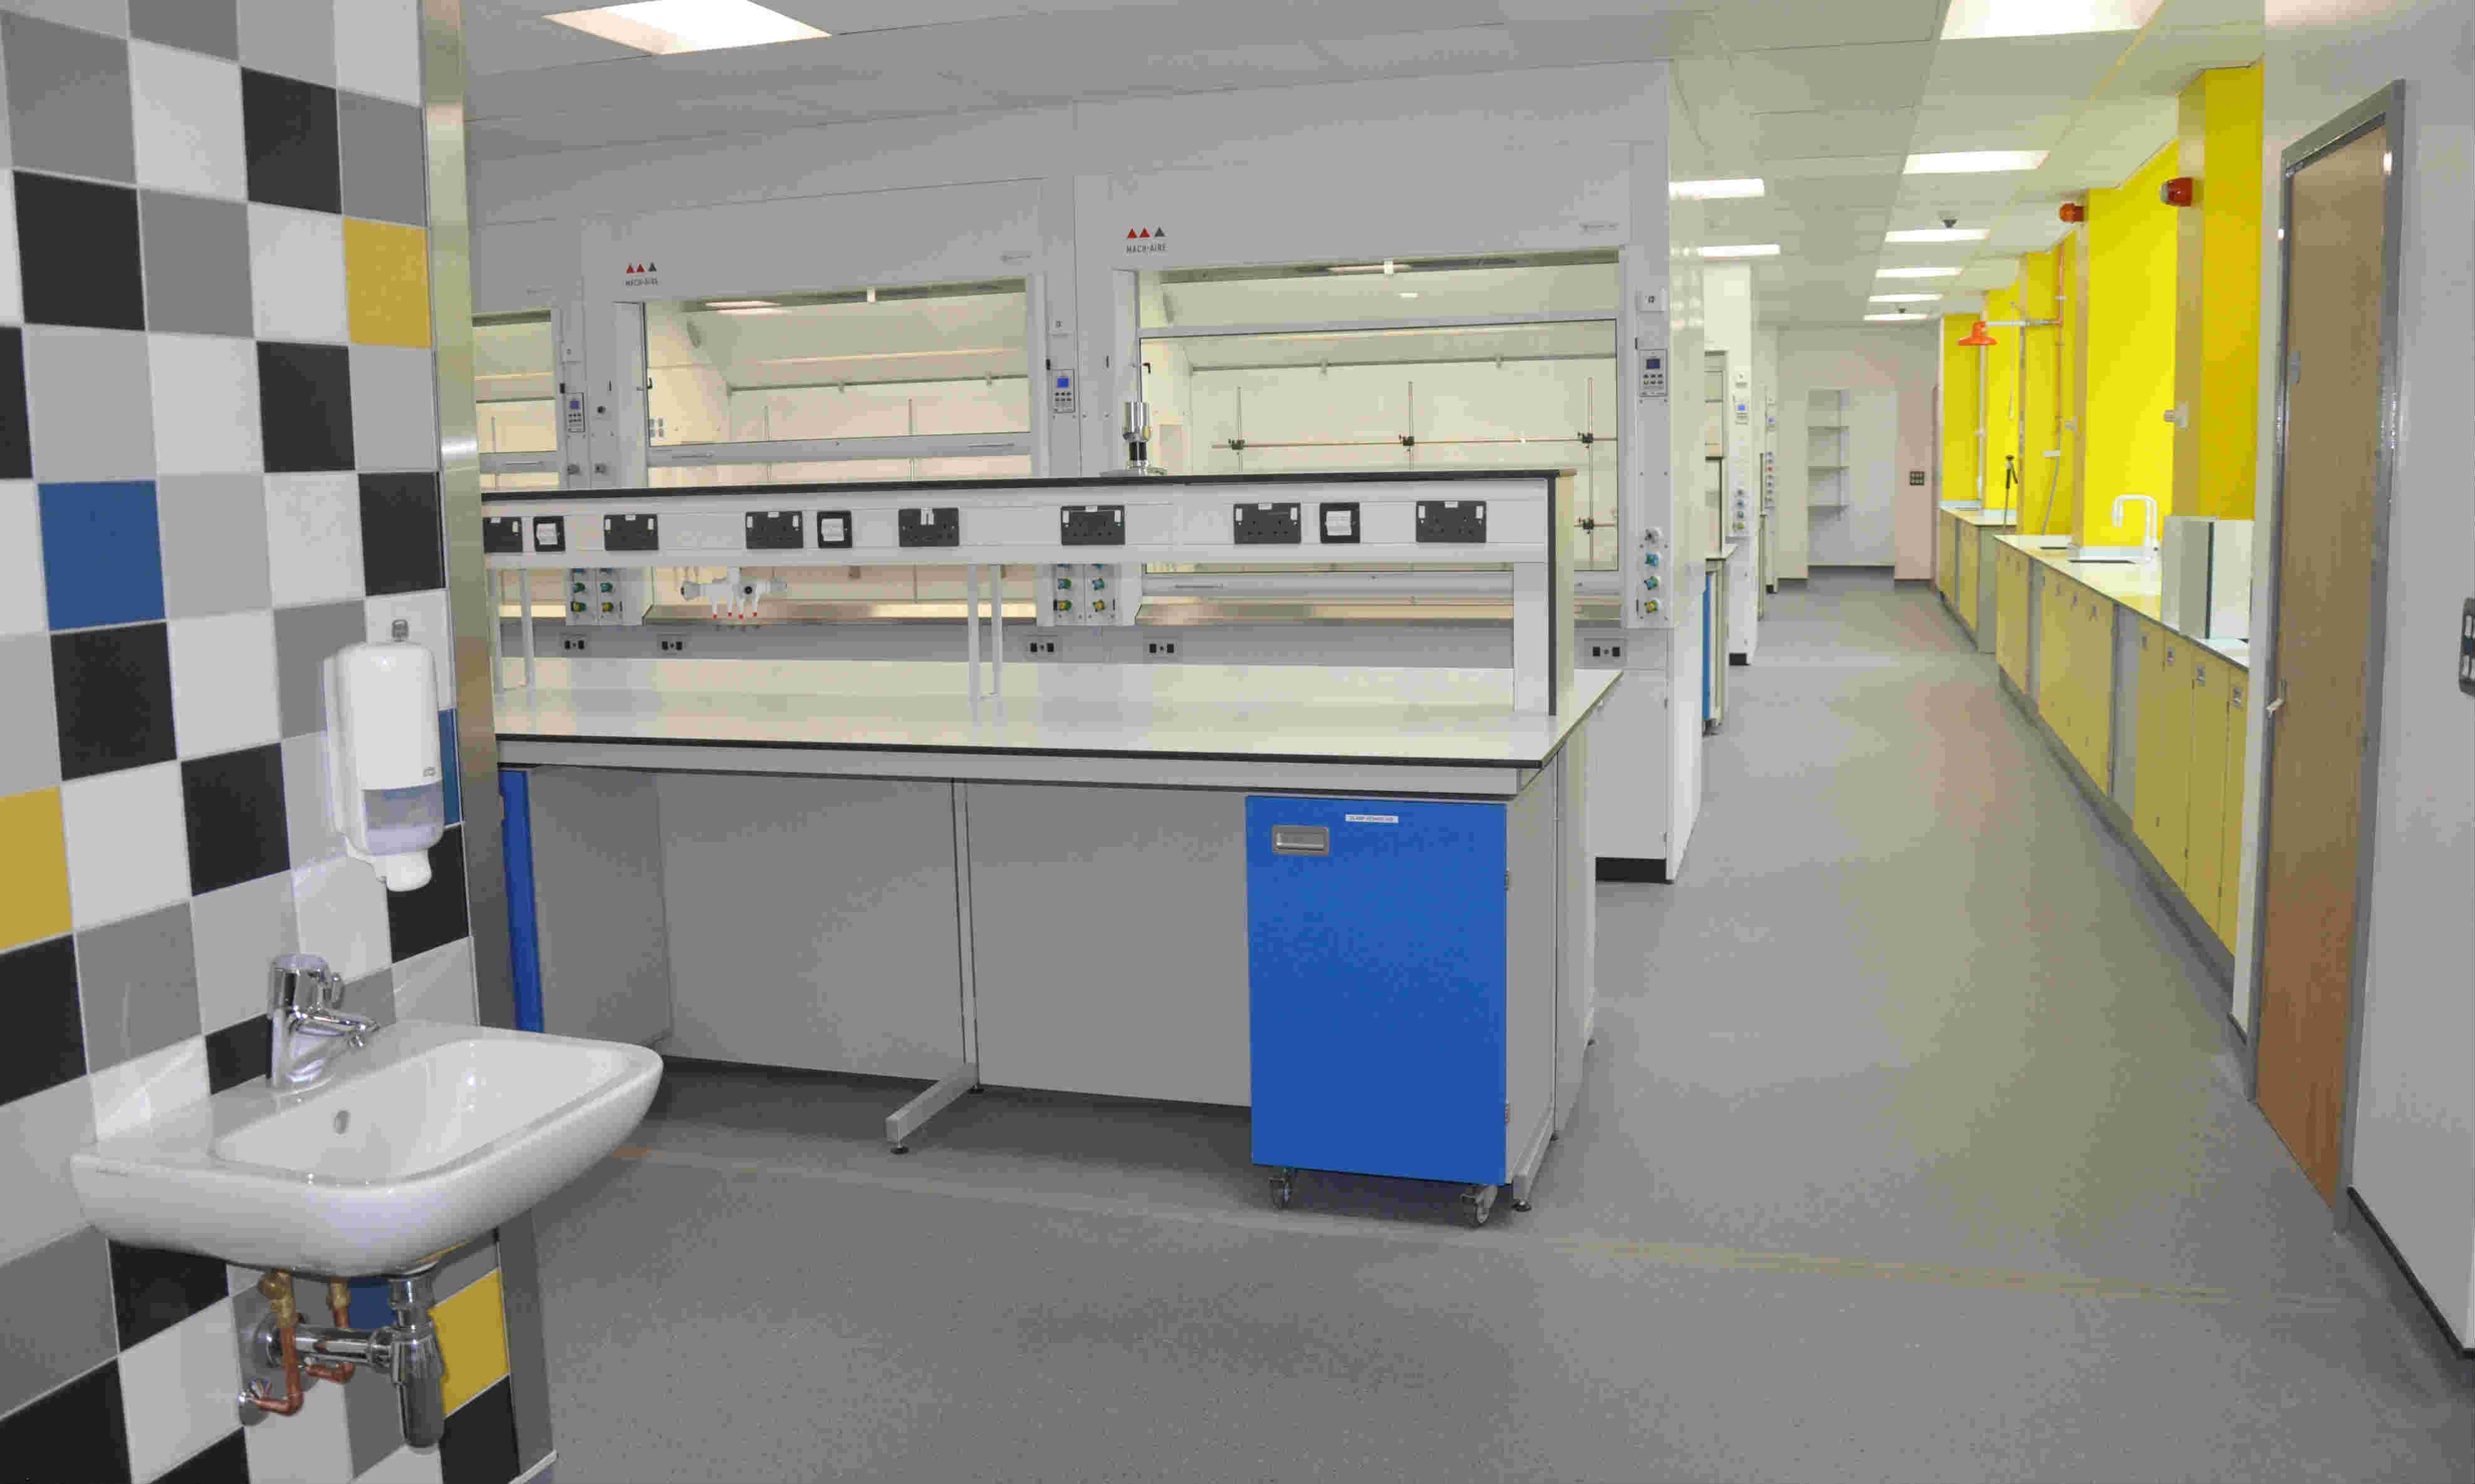 Bostik provides the right formula for Swansea University chemistry labs